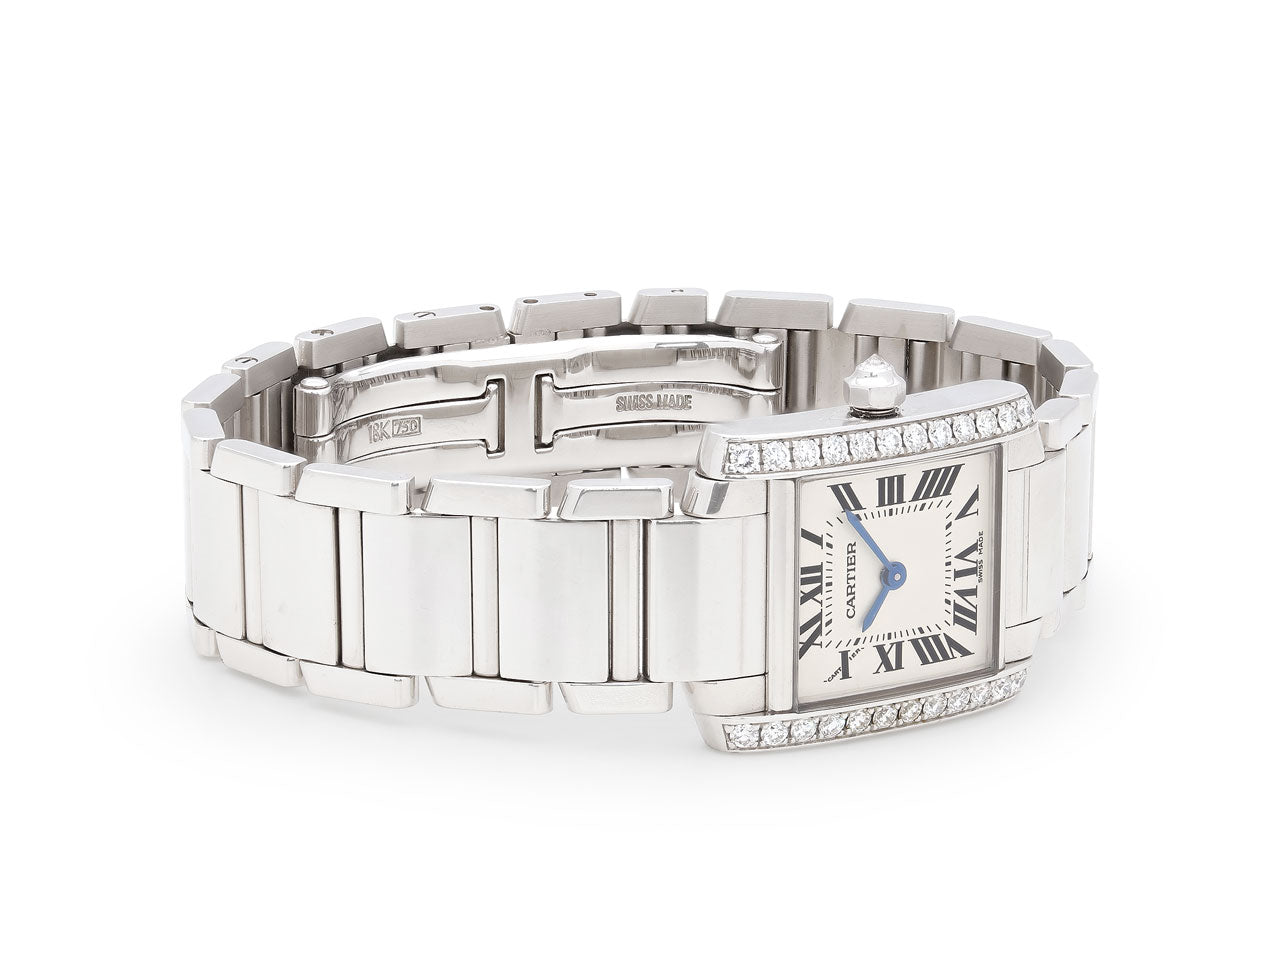 Cartier 'Tank Française' Diamond Watch in 18K White Gold, Small Model